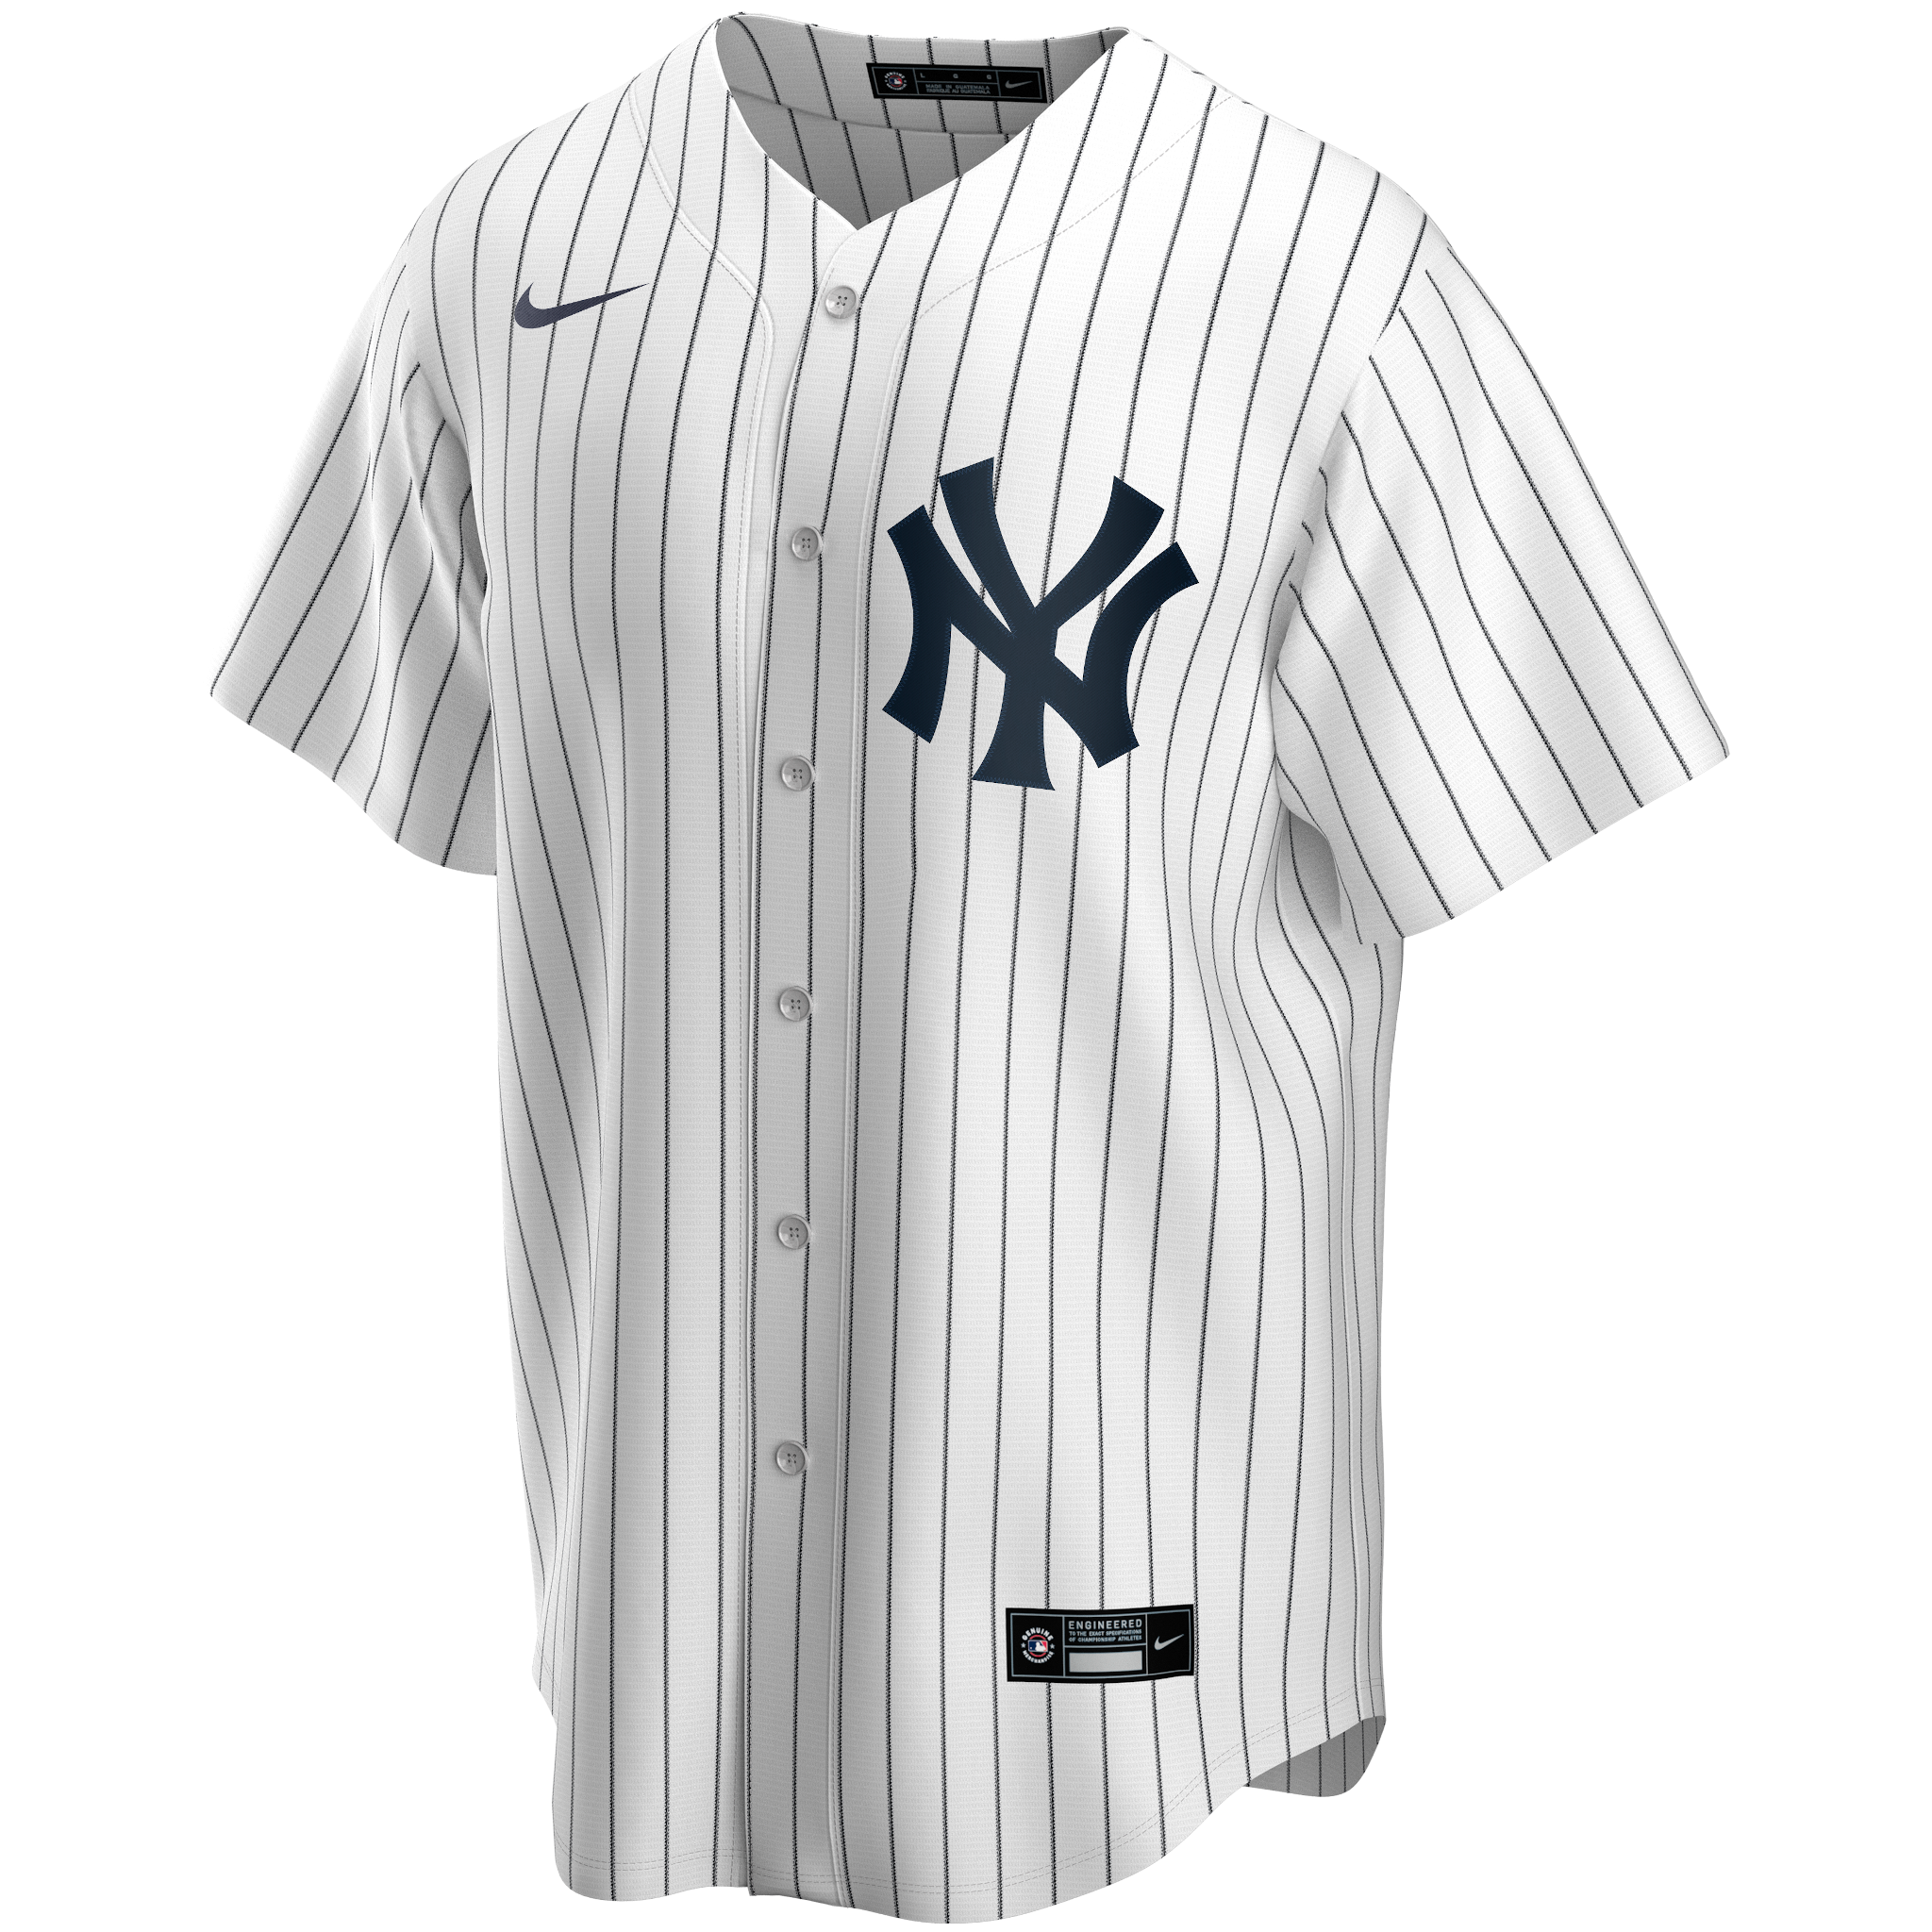 Fanatics Authentic Gerrit Cole New York Yankees Game-Used #45 White Pinstripe Jersey vs. Kansas City Royals on July 22, 2023